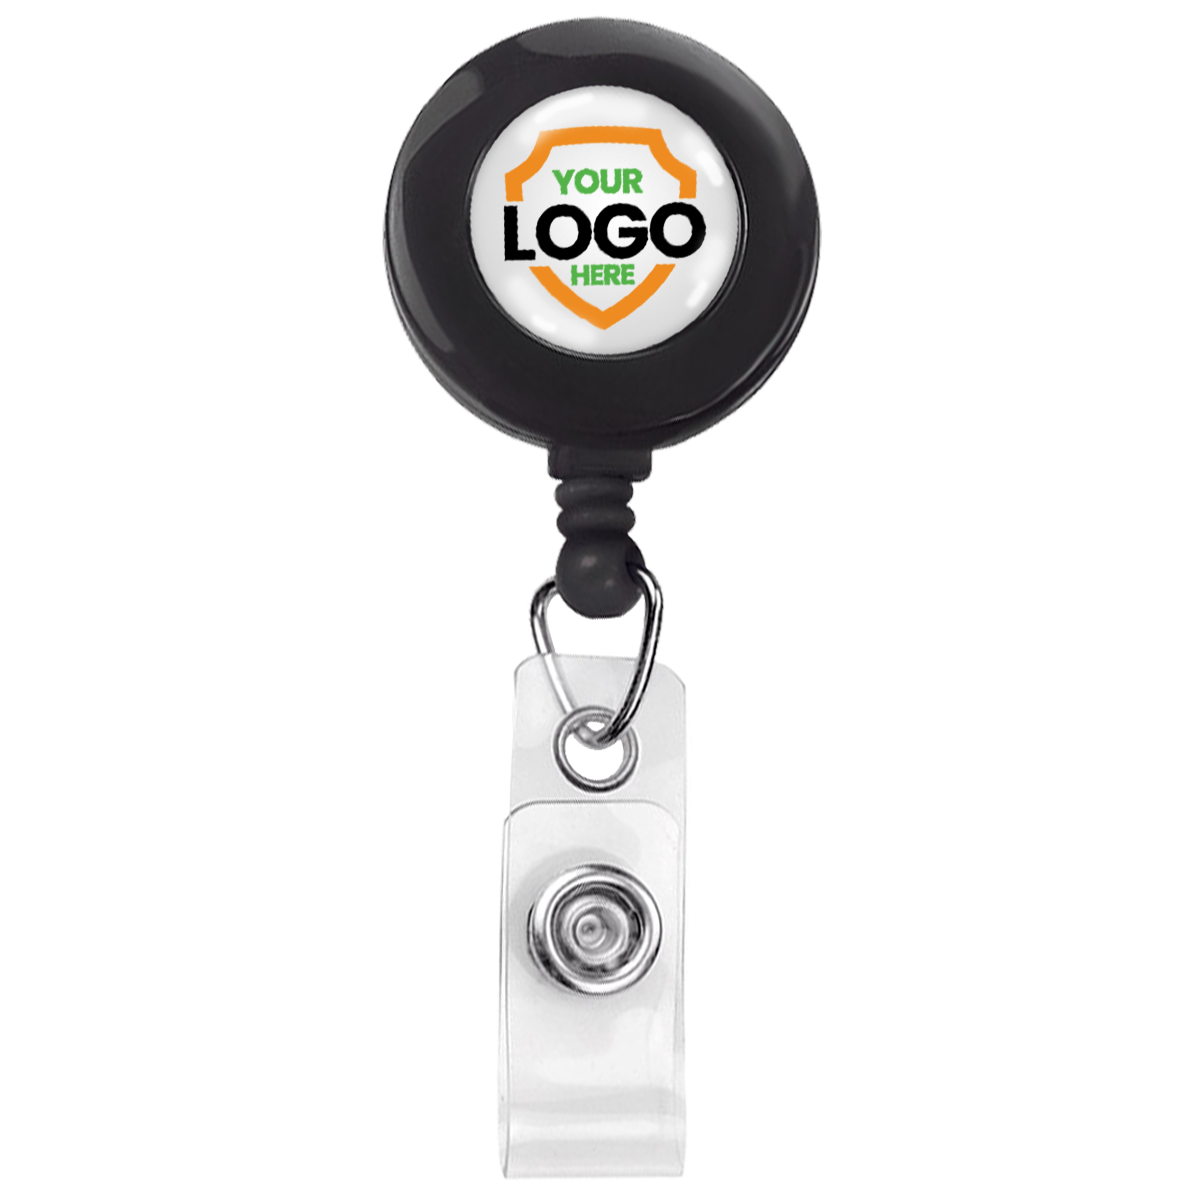 A Custom Printed Retractable Badge Reels With Belt Clip - Personalize with Your Brand Logo, finished with a transparent clip at the end, is perfect to promote brand awareness.